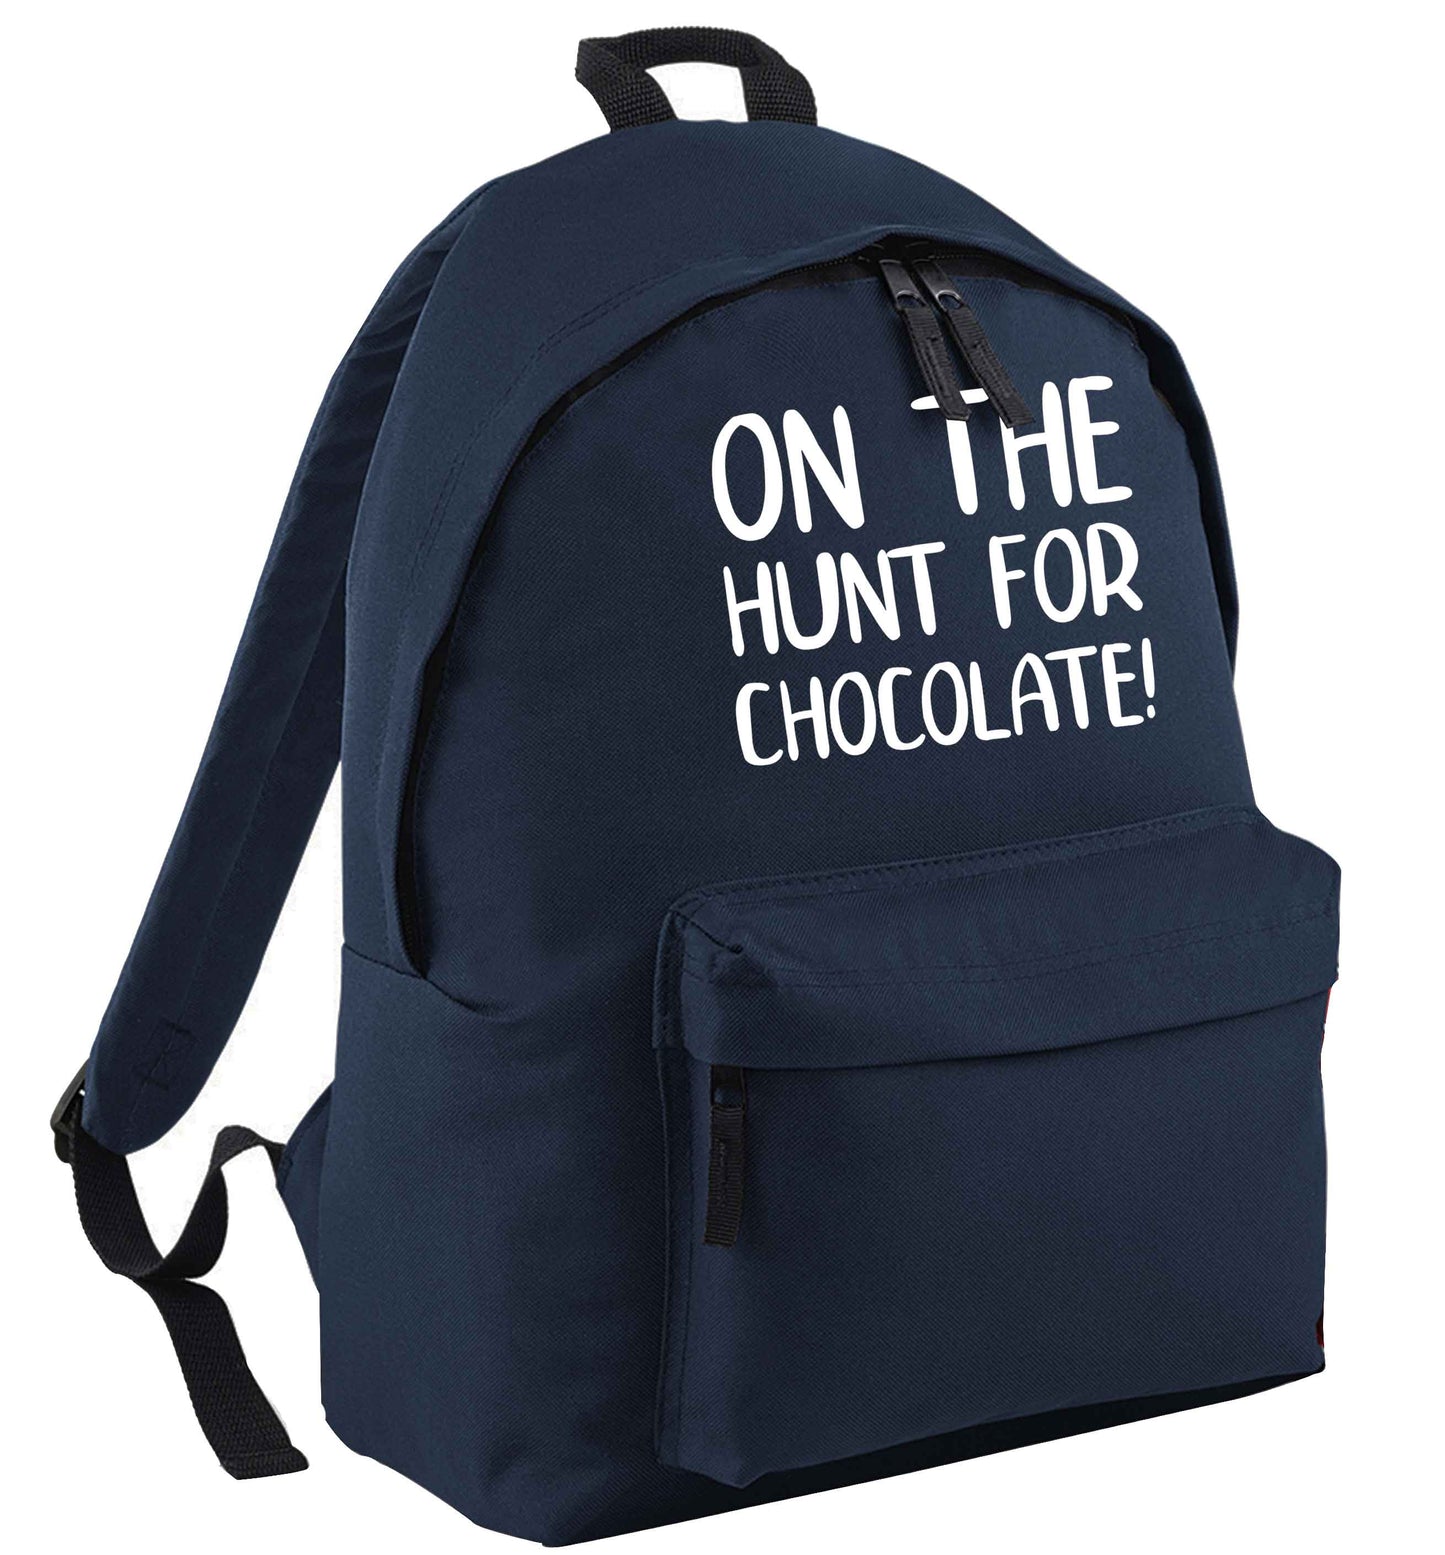 On the hunt for chocolate! navy adults backpack